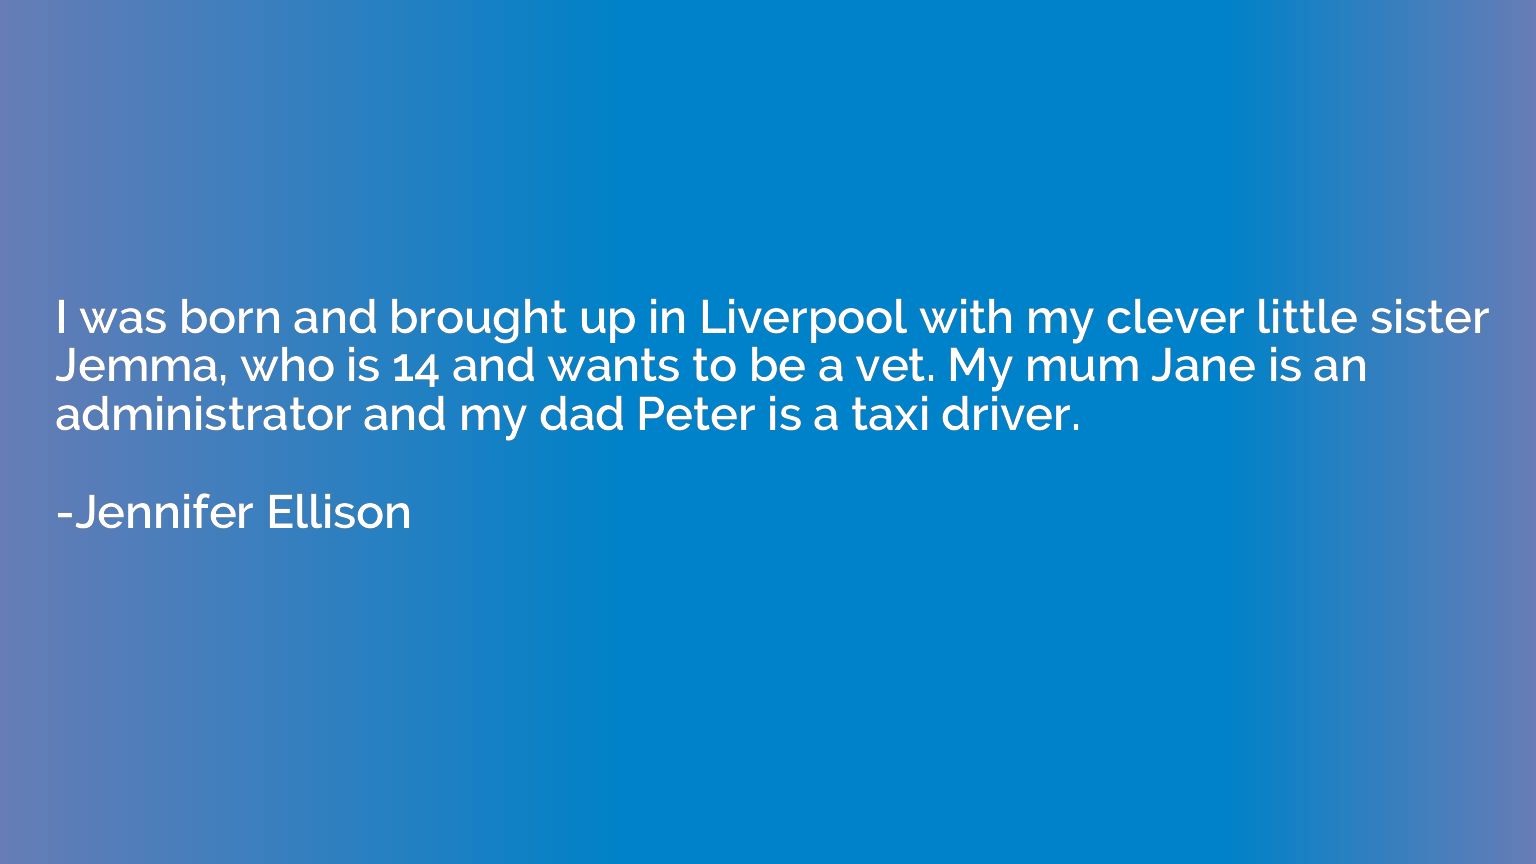 I was born and brought up in Liverpool with my clever little